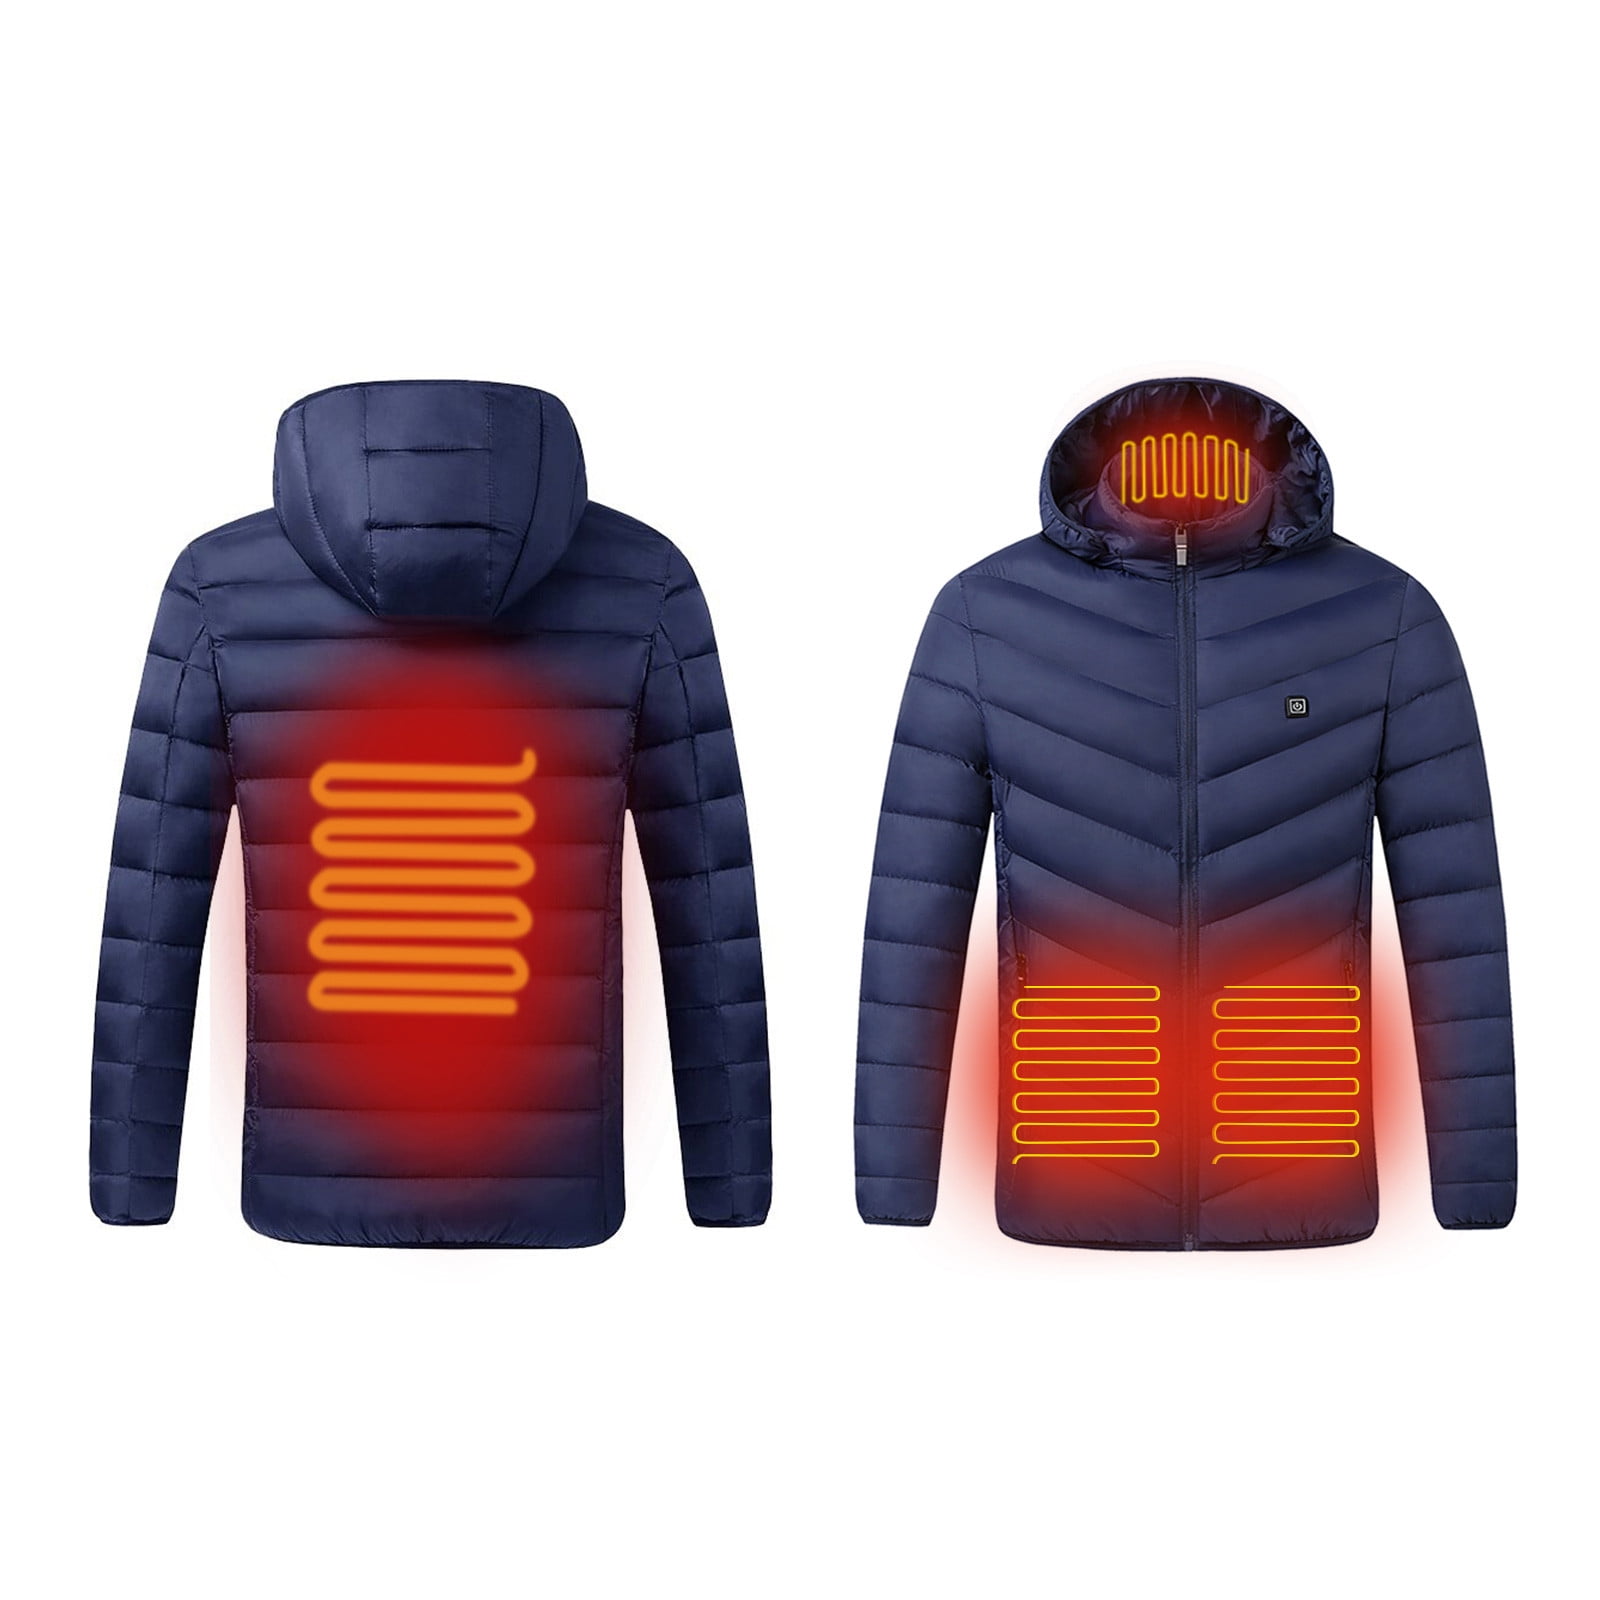 XMMSWDLA Sales Clearance Blousse for Men Outdoor Warm Clothing Heated For  Riding Skiing Fishing Charging Via Heated Coat